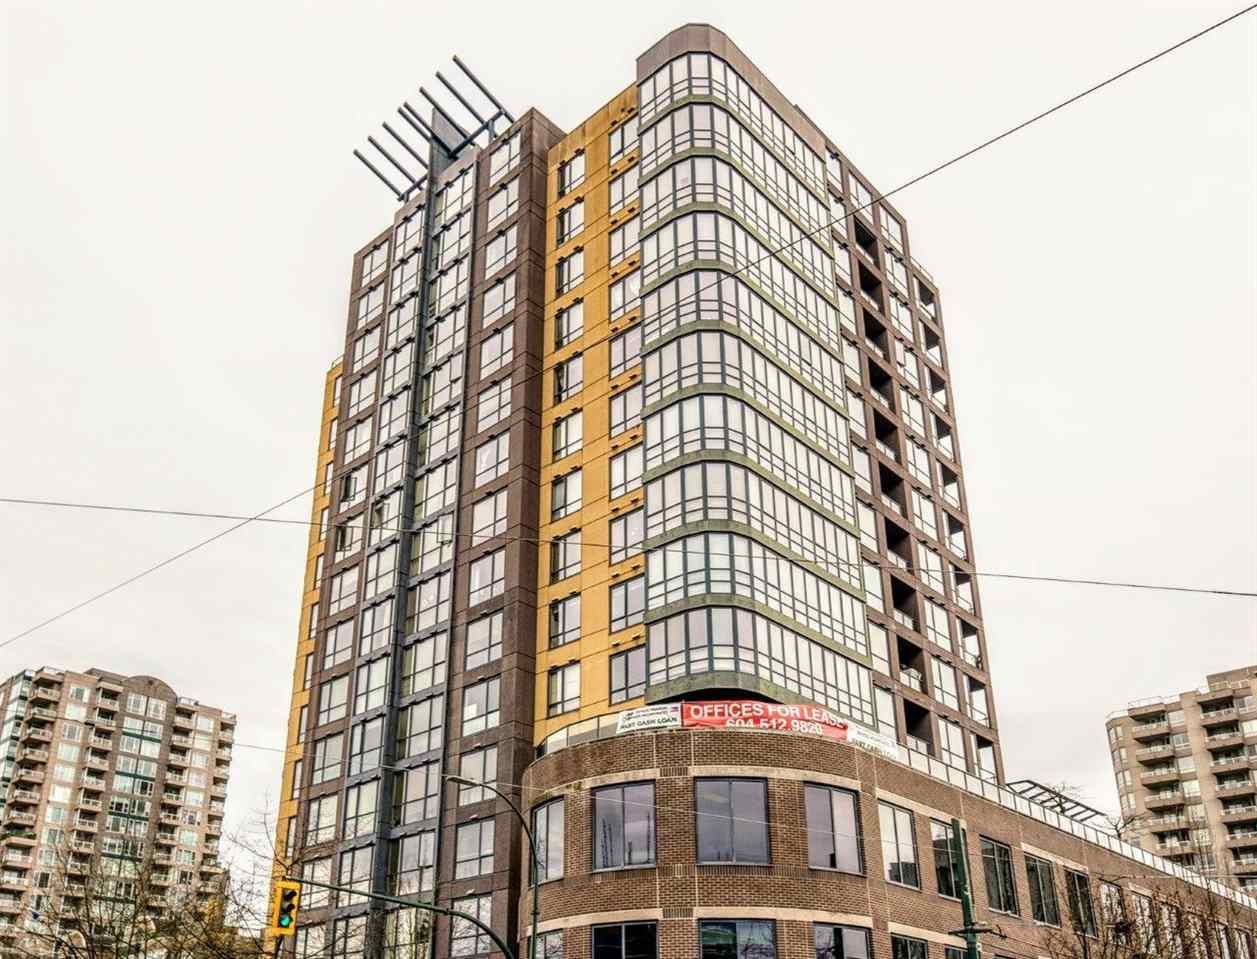 Main Photo: 1103 3438 VANNESS AVENUE in Vancouver: Collingwood VE Condo for sale (Vancouver East)  : MLS®# R2169737